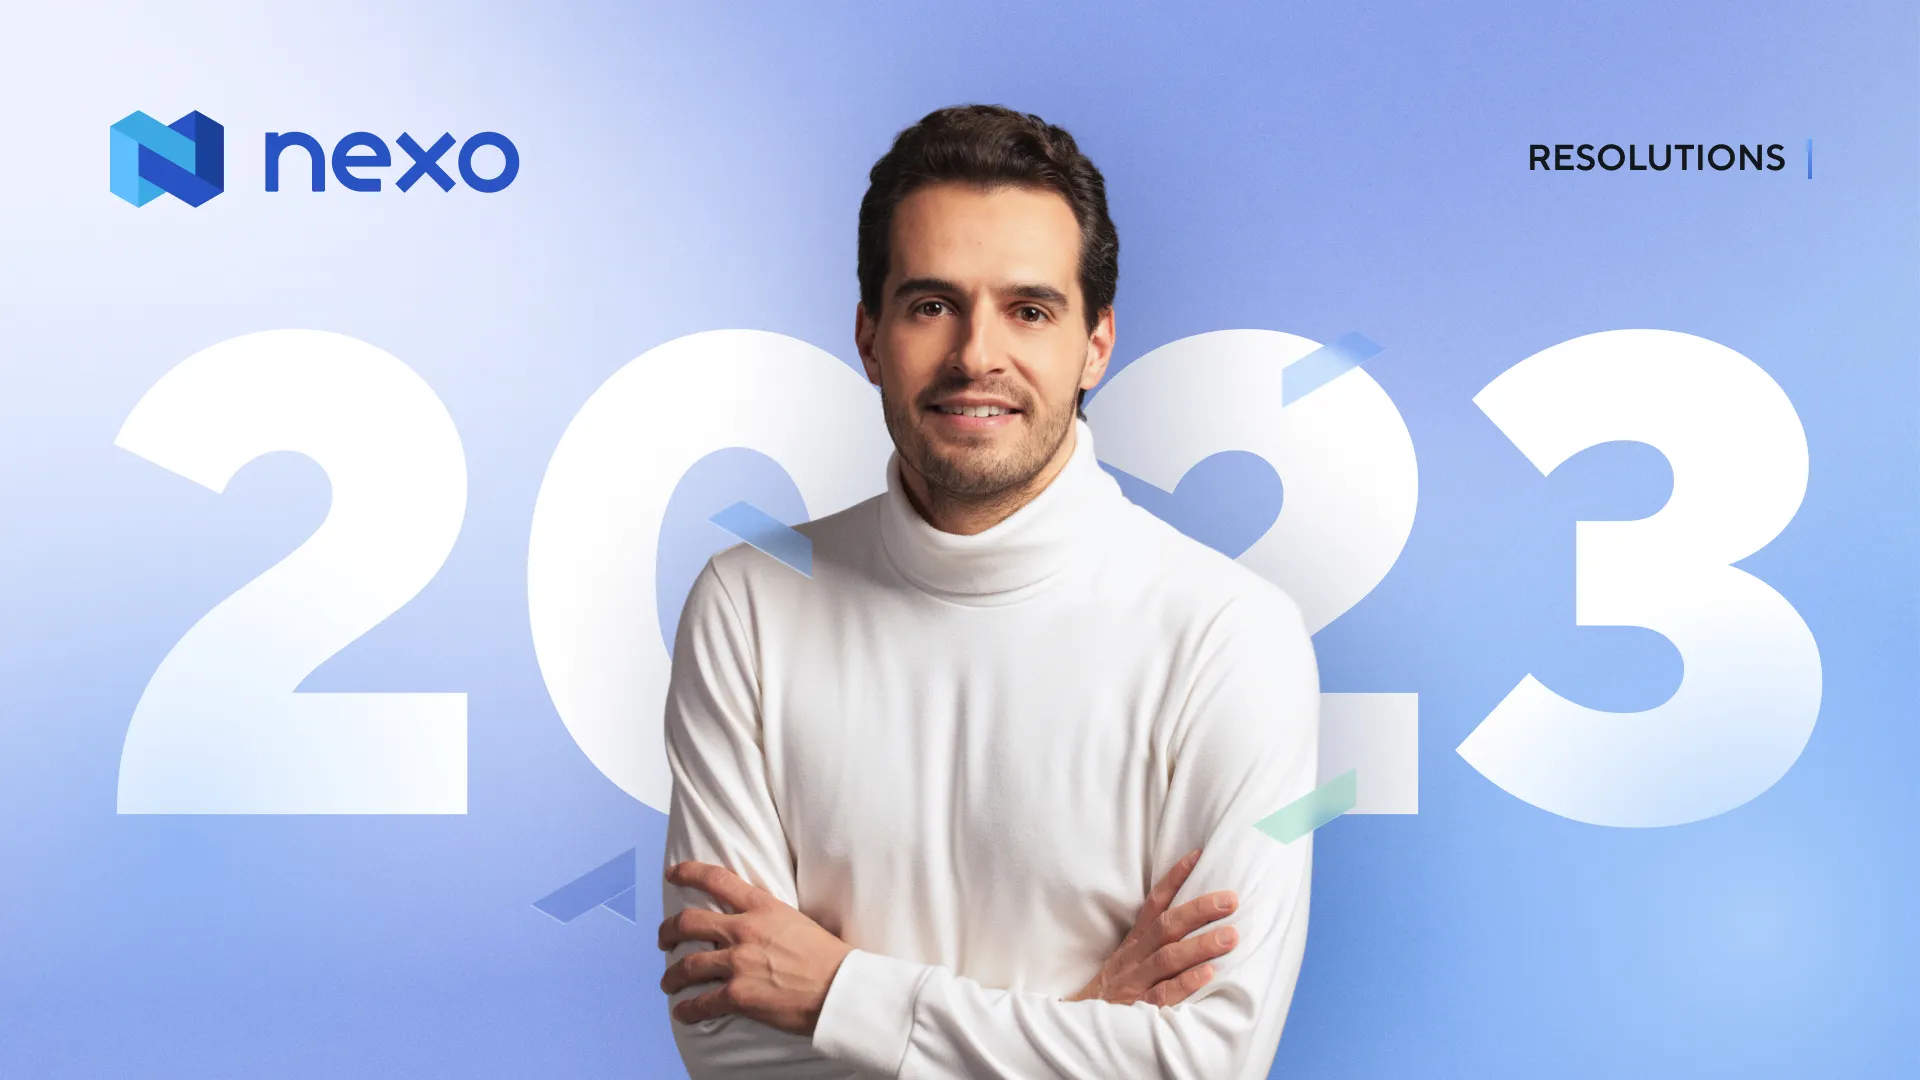 Antoni Trenchev portrait in front of large 2023 text in a Nexo visual.